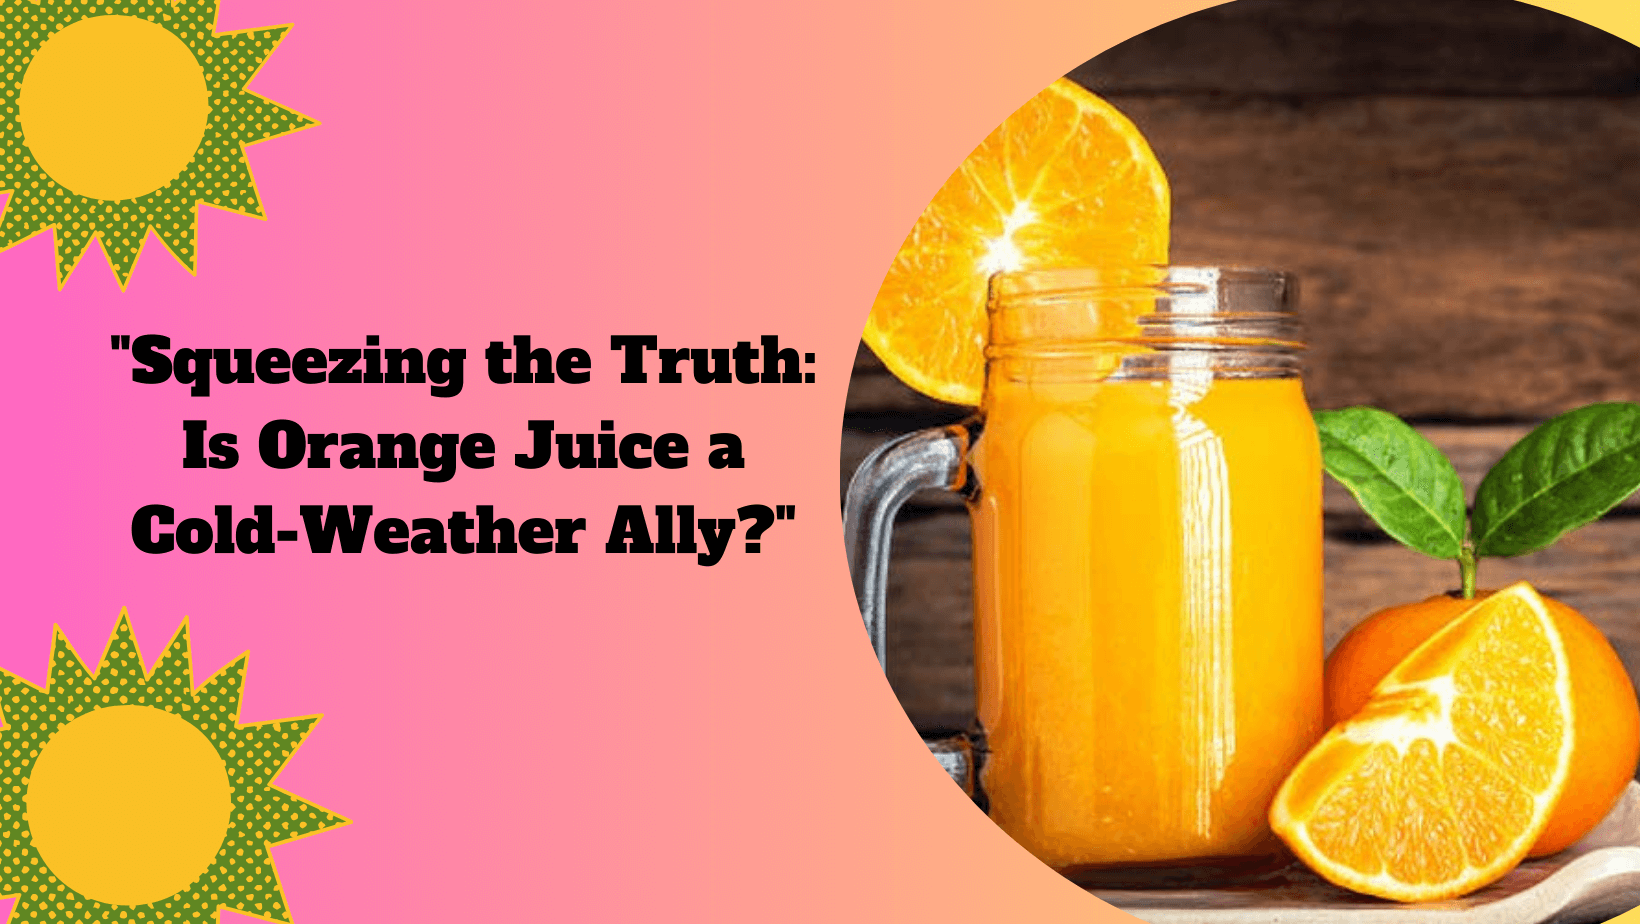 cover image representing orange juice and its benefits for cold